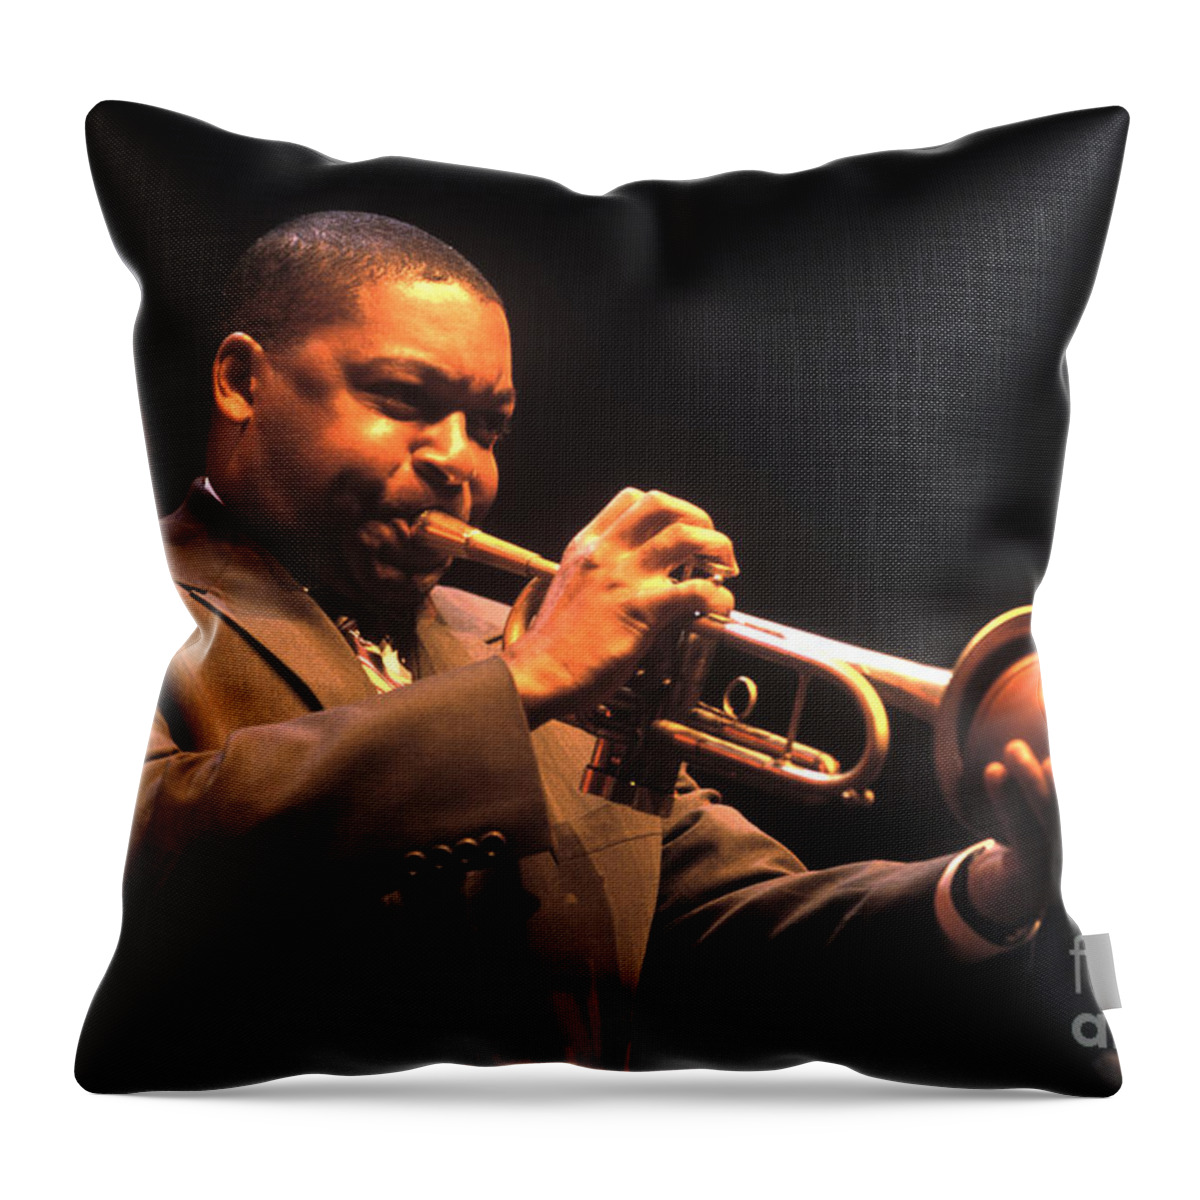 Wynton Marsalis Plays Trumpet At The Monterey Jazz Festival Throw Pillow featuring the photograph Wynton Marsalis by Craig Lovell